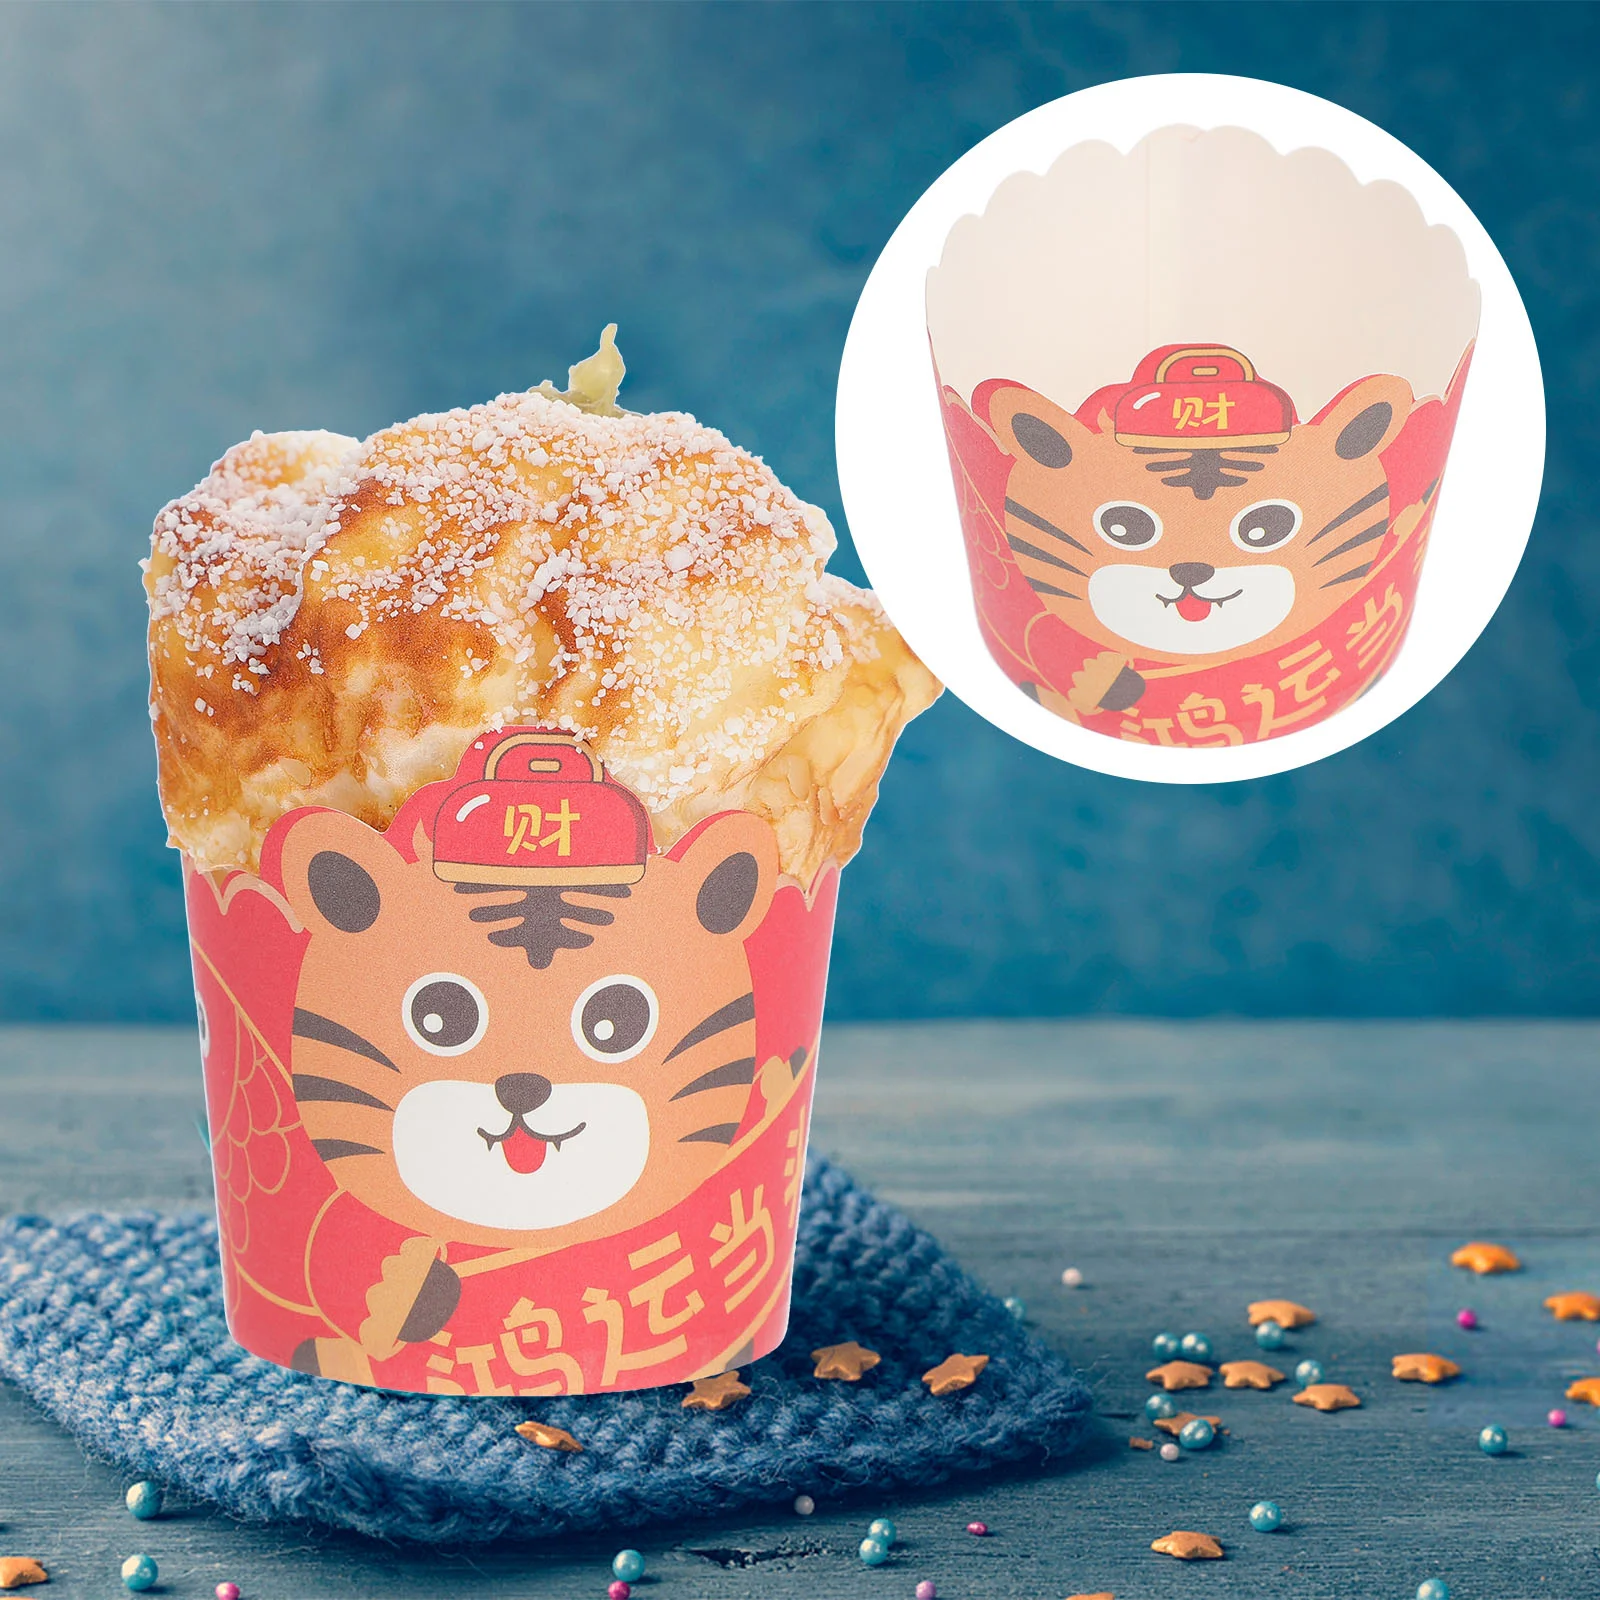 

Cupcake New Cup Year Cake Baking Liner Wrapper Spring Wrappers Festival Chinese Favors Party Cups Paper Pan Holder Years